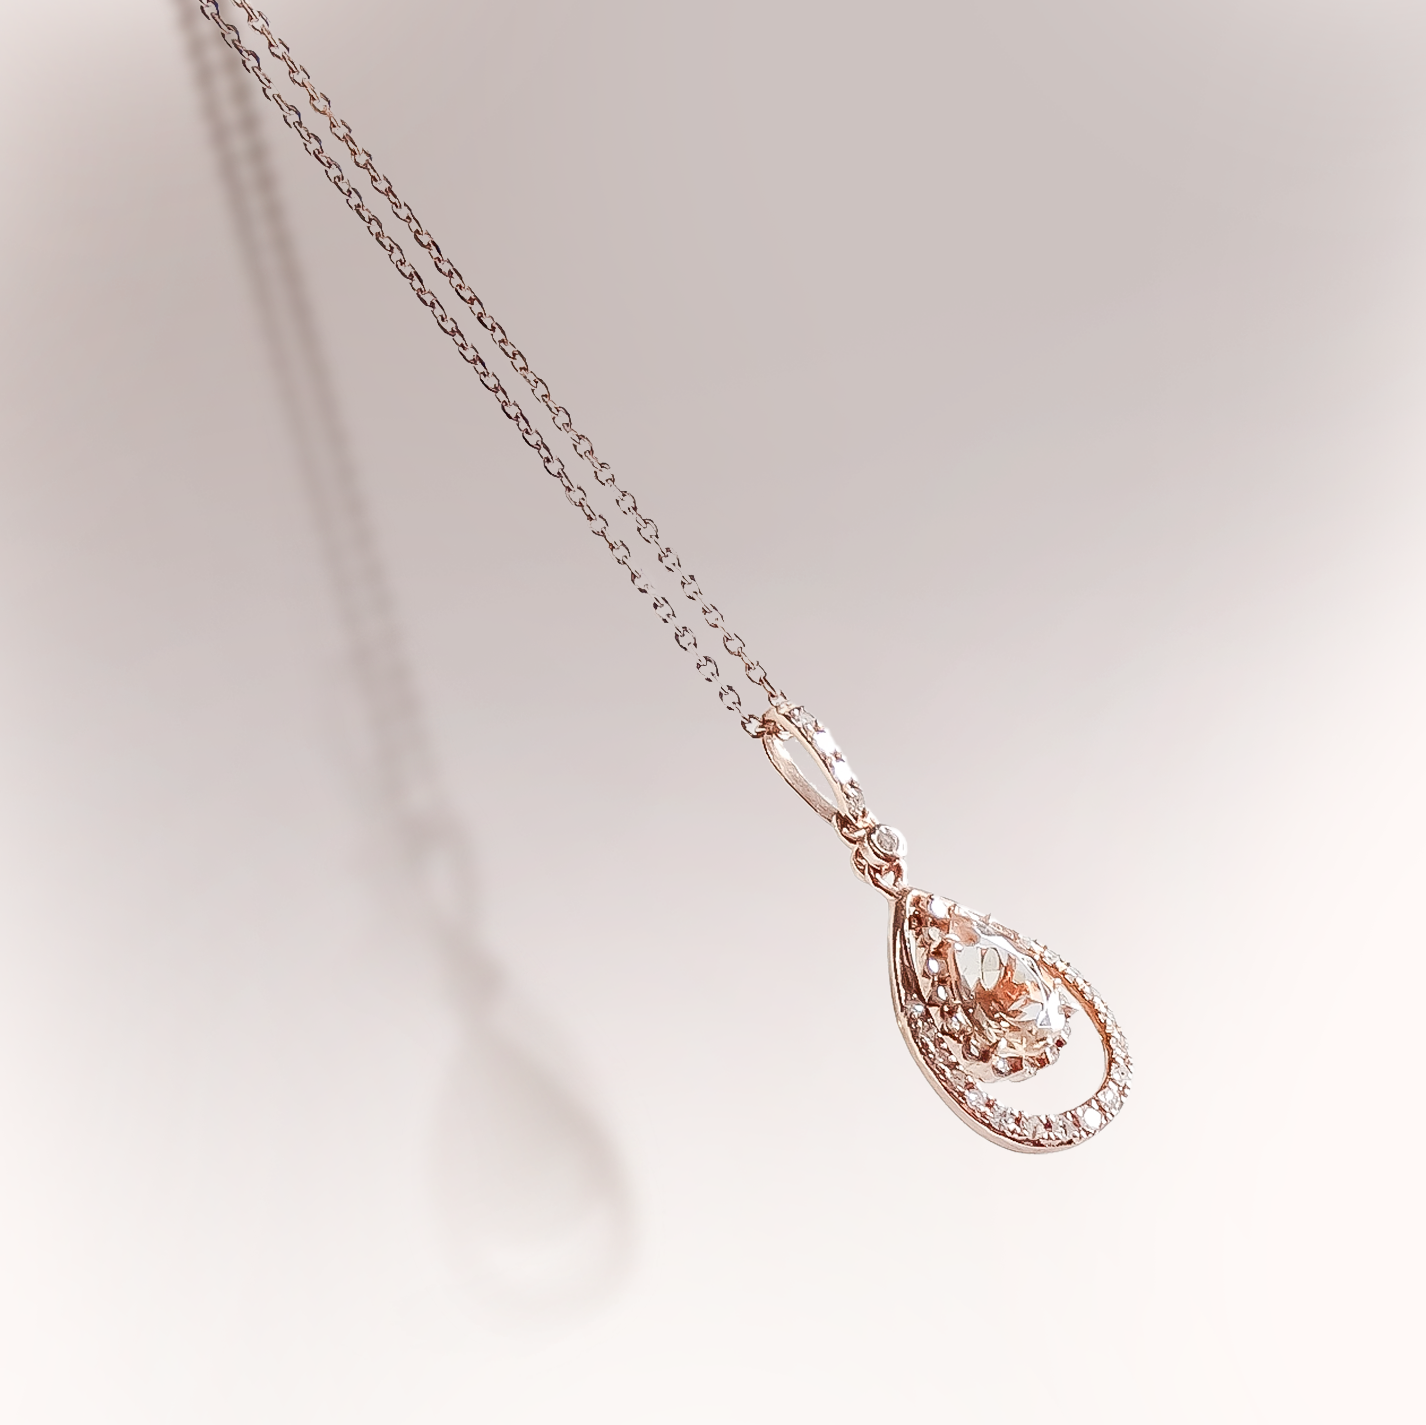 0.50ct Morganite Tear Pendant with double Diamond hang Halo in 9ct Rose Gold on Chain